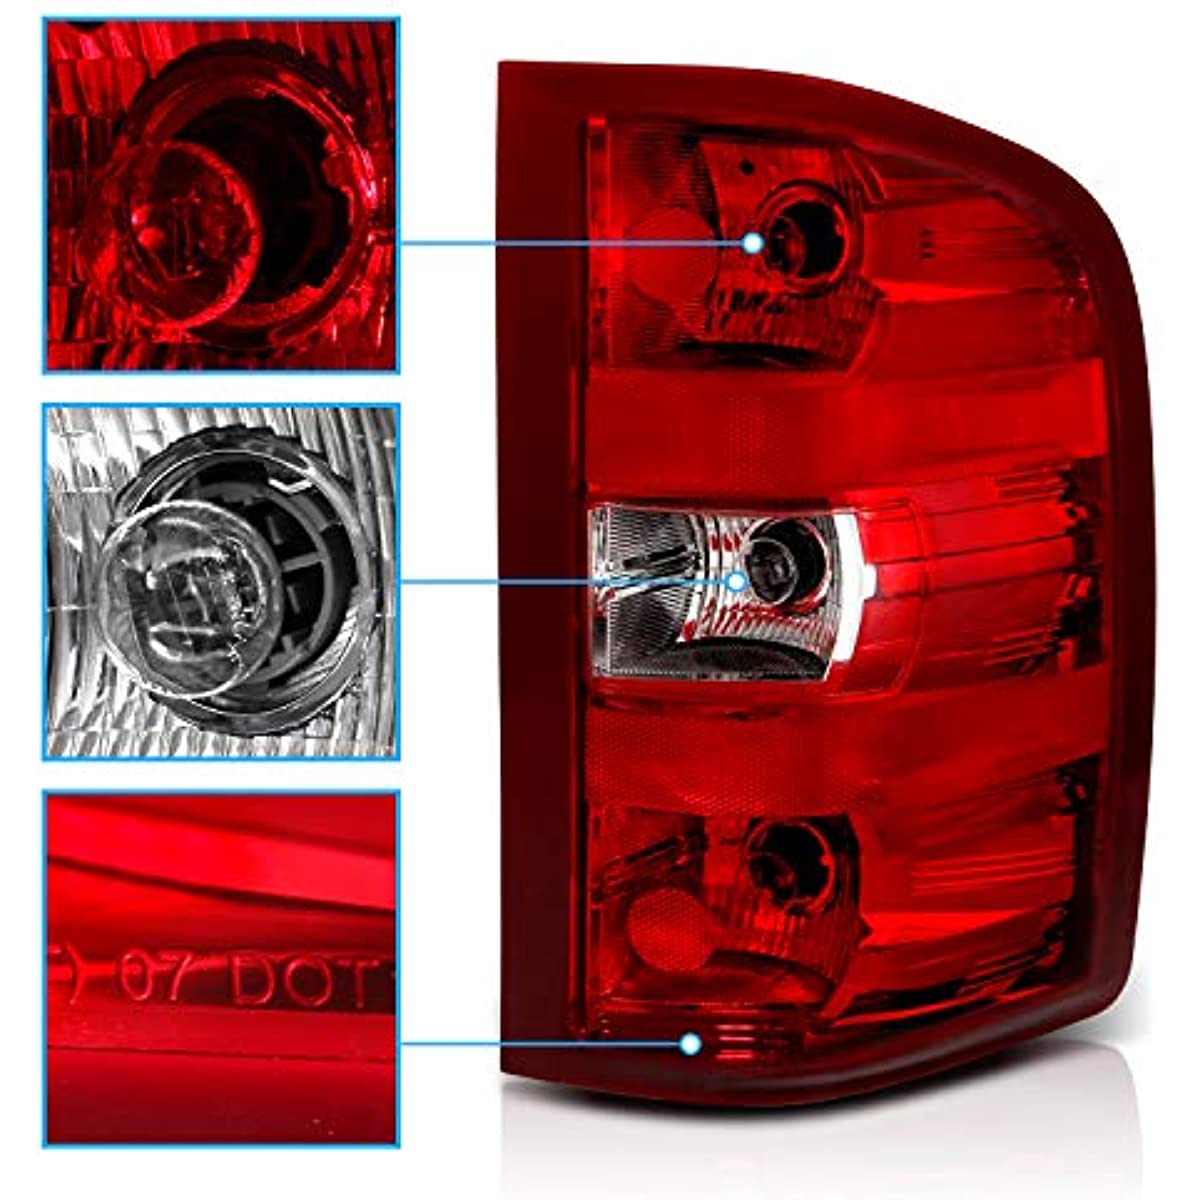 2007-2014 Chevy Silverado 1500 2500 3500 OE Replacement Tail Light Brake Lamp Pair w/Bulb and Harness